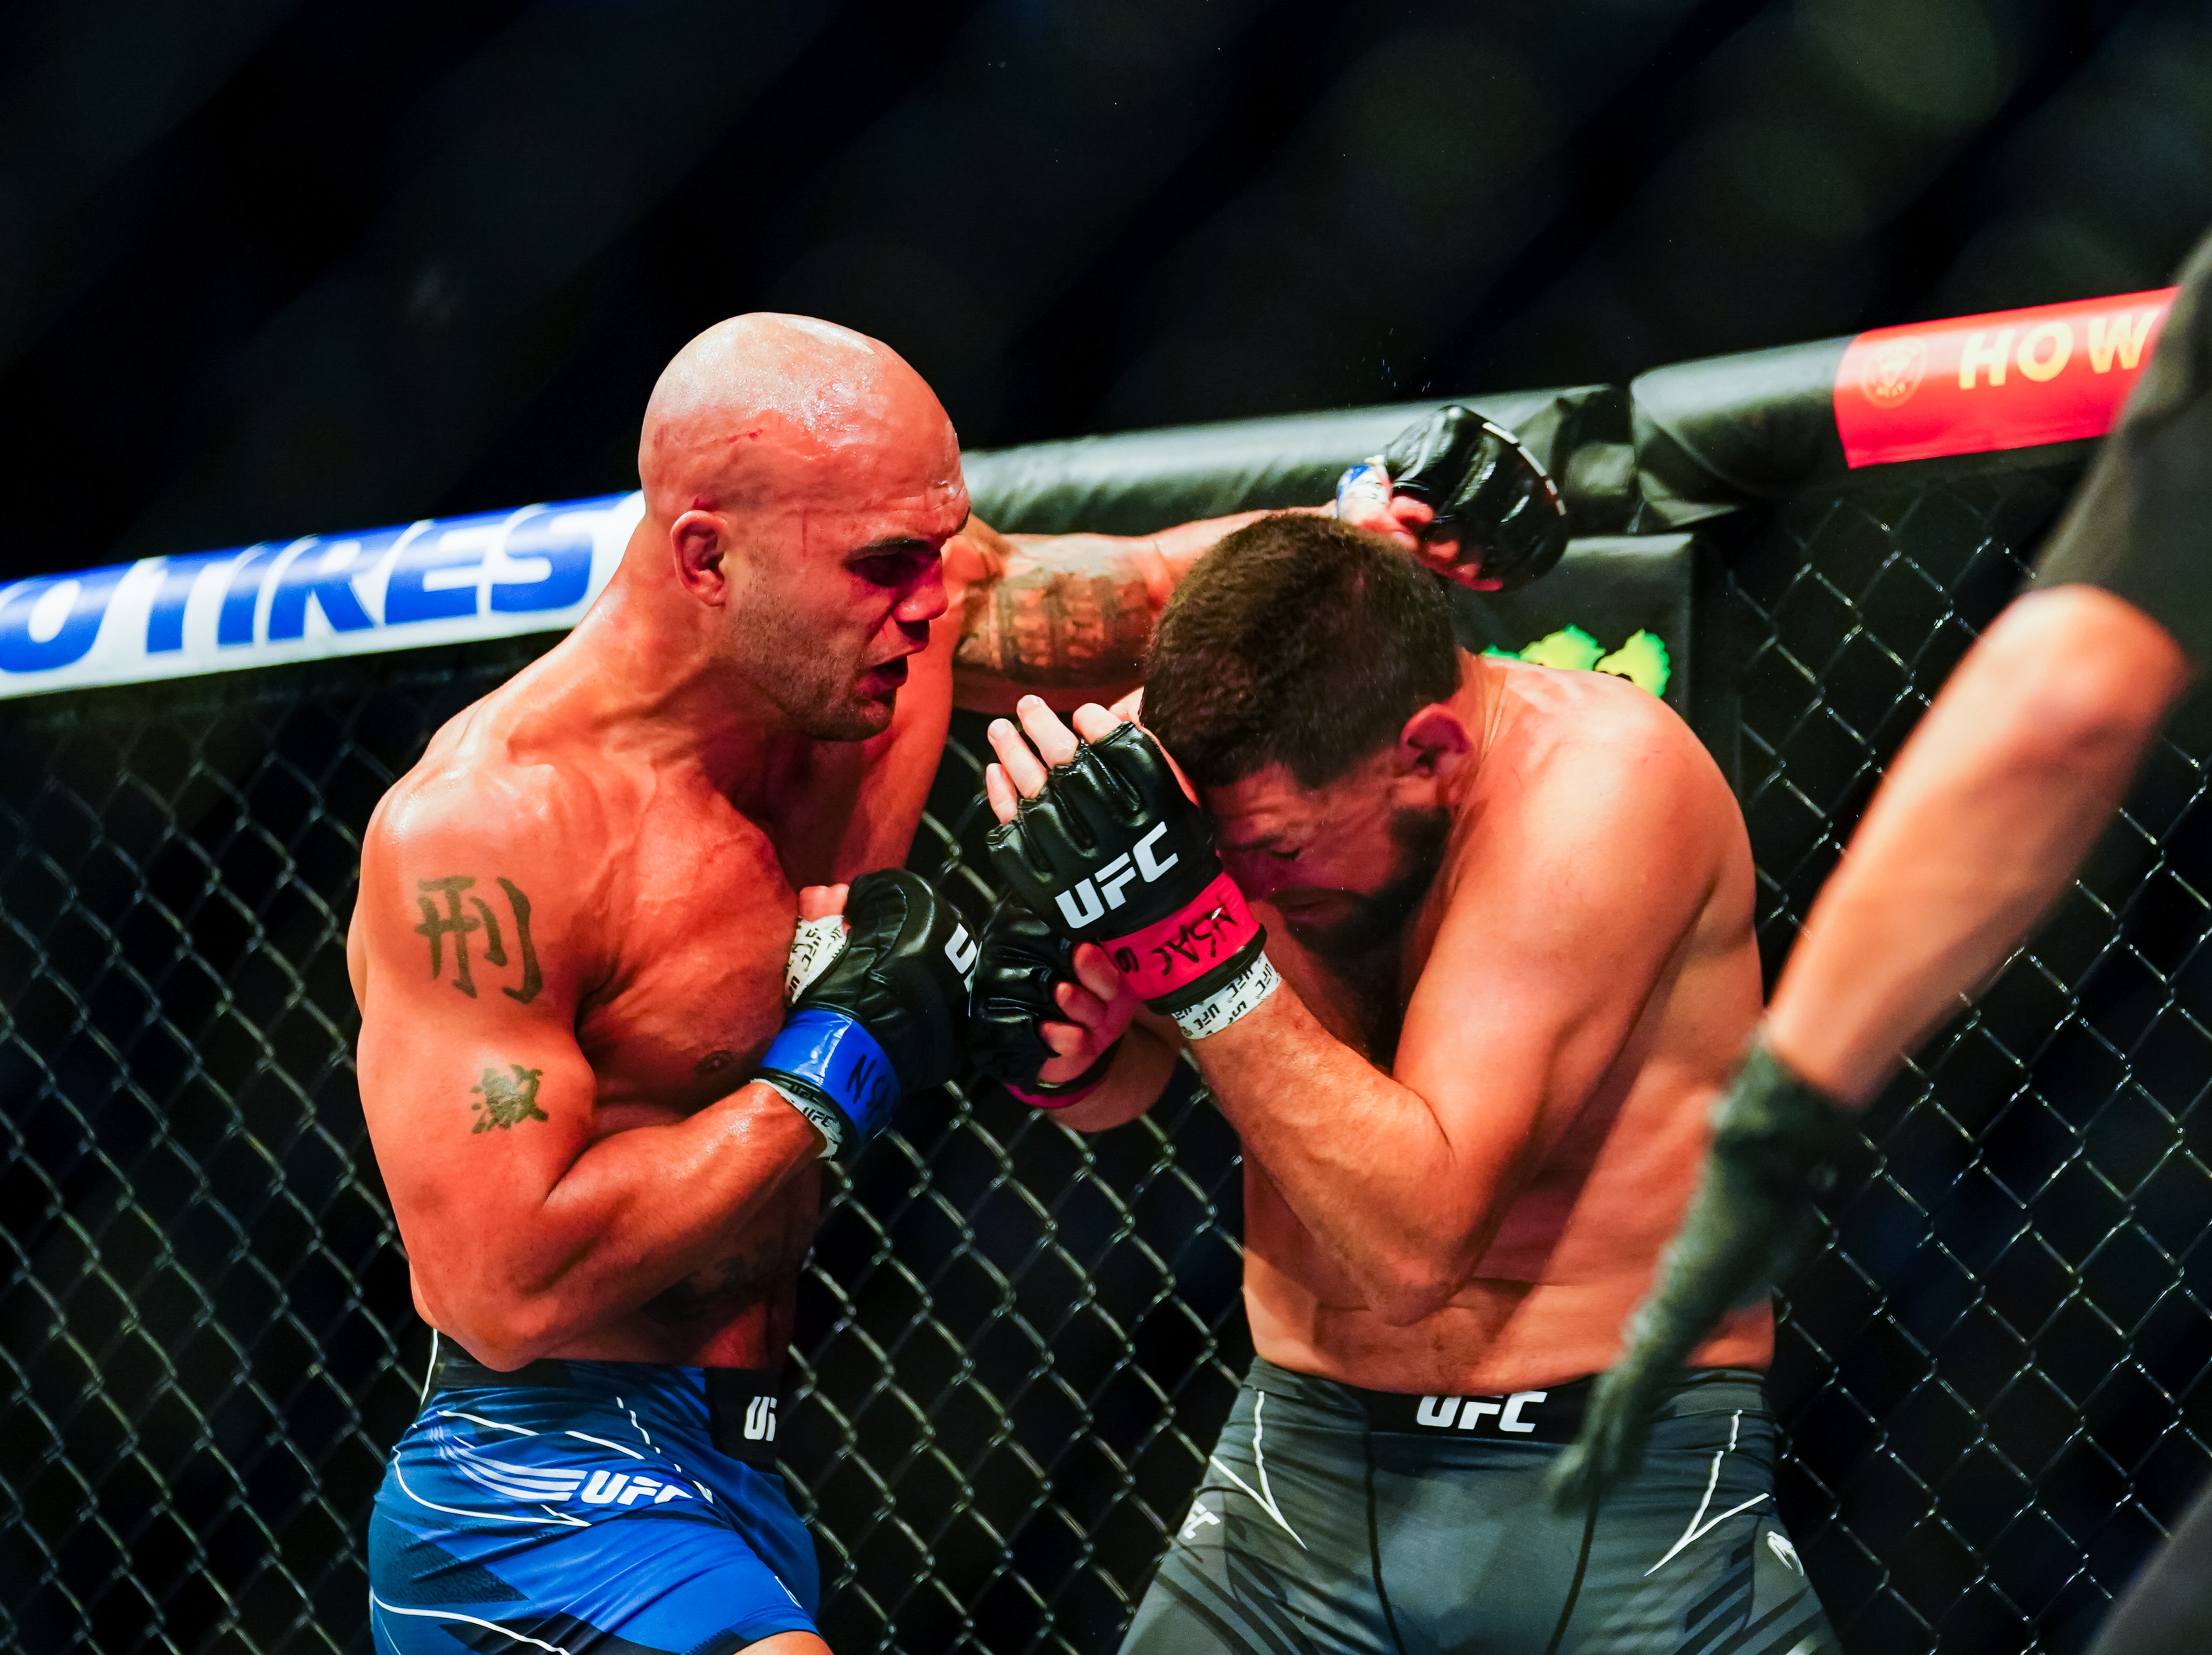 Robbie Lawler stopped Nick Diaz in the third round of their rematch